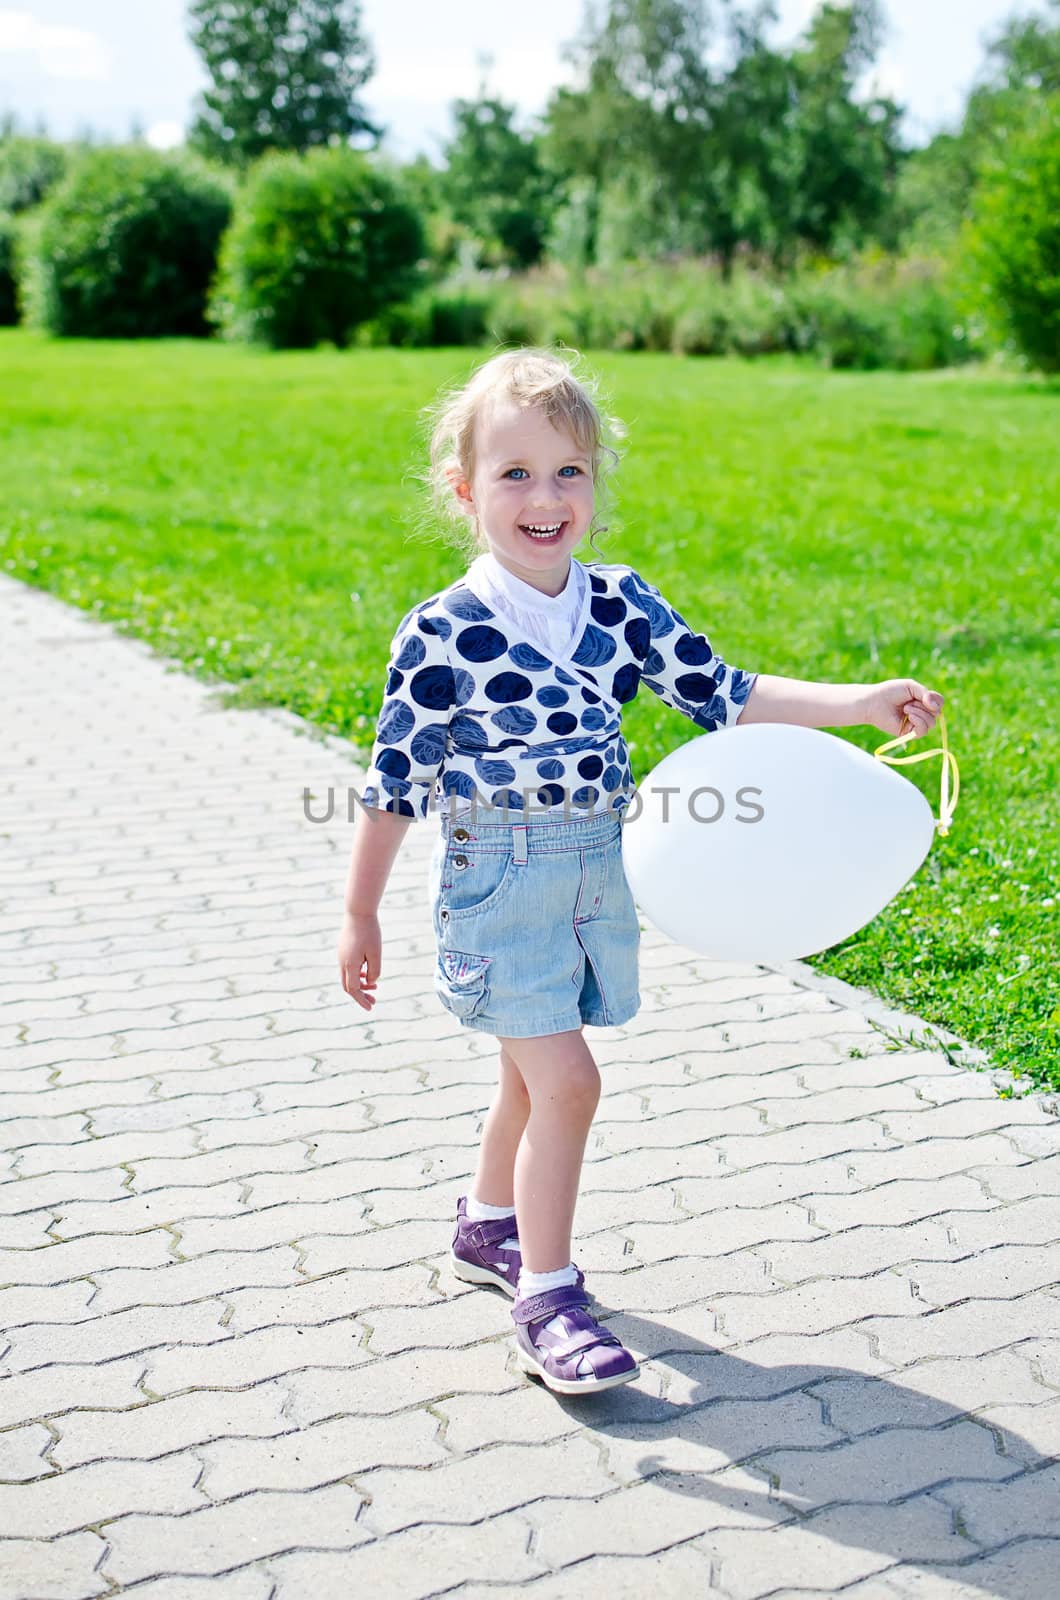 Smiling little girl with balloon in the park.